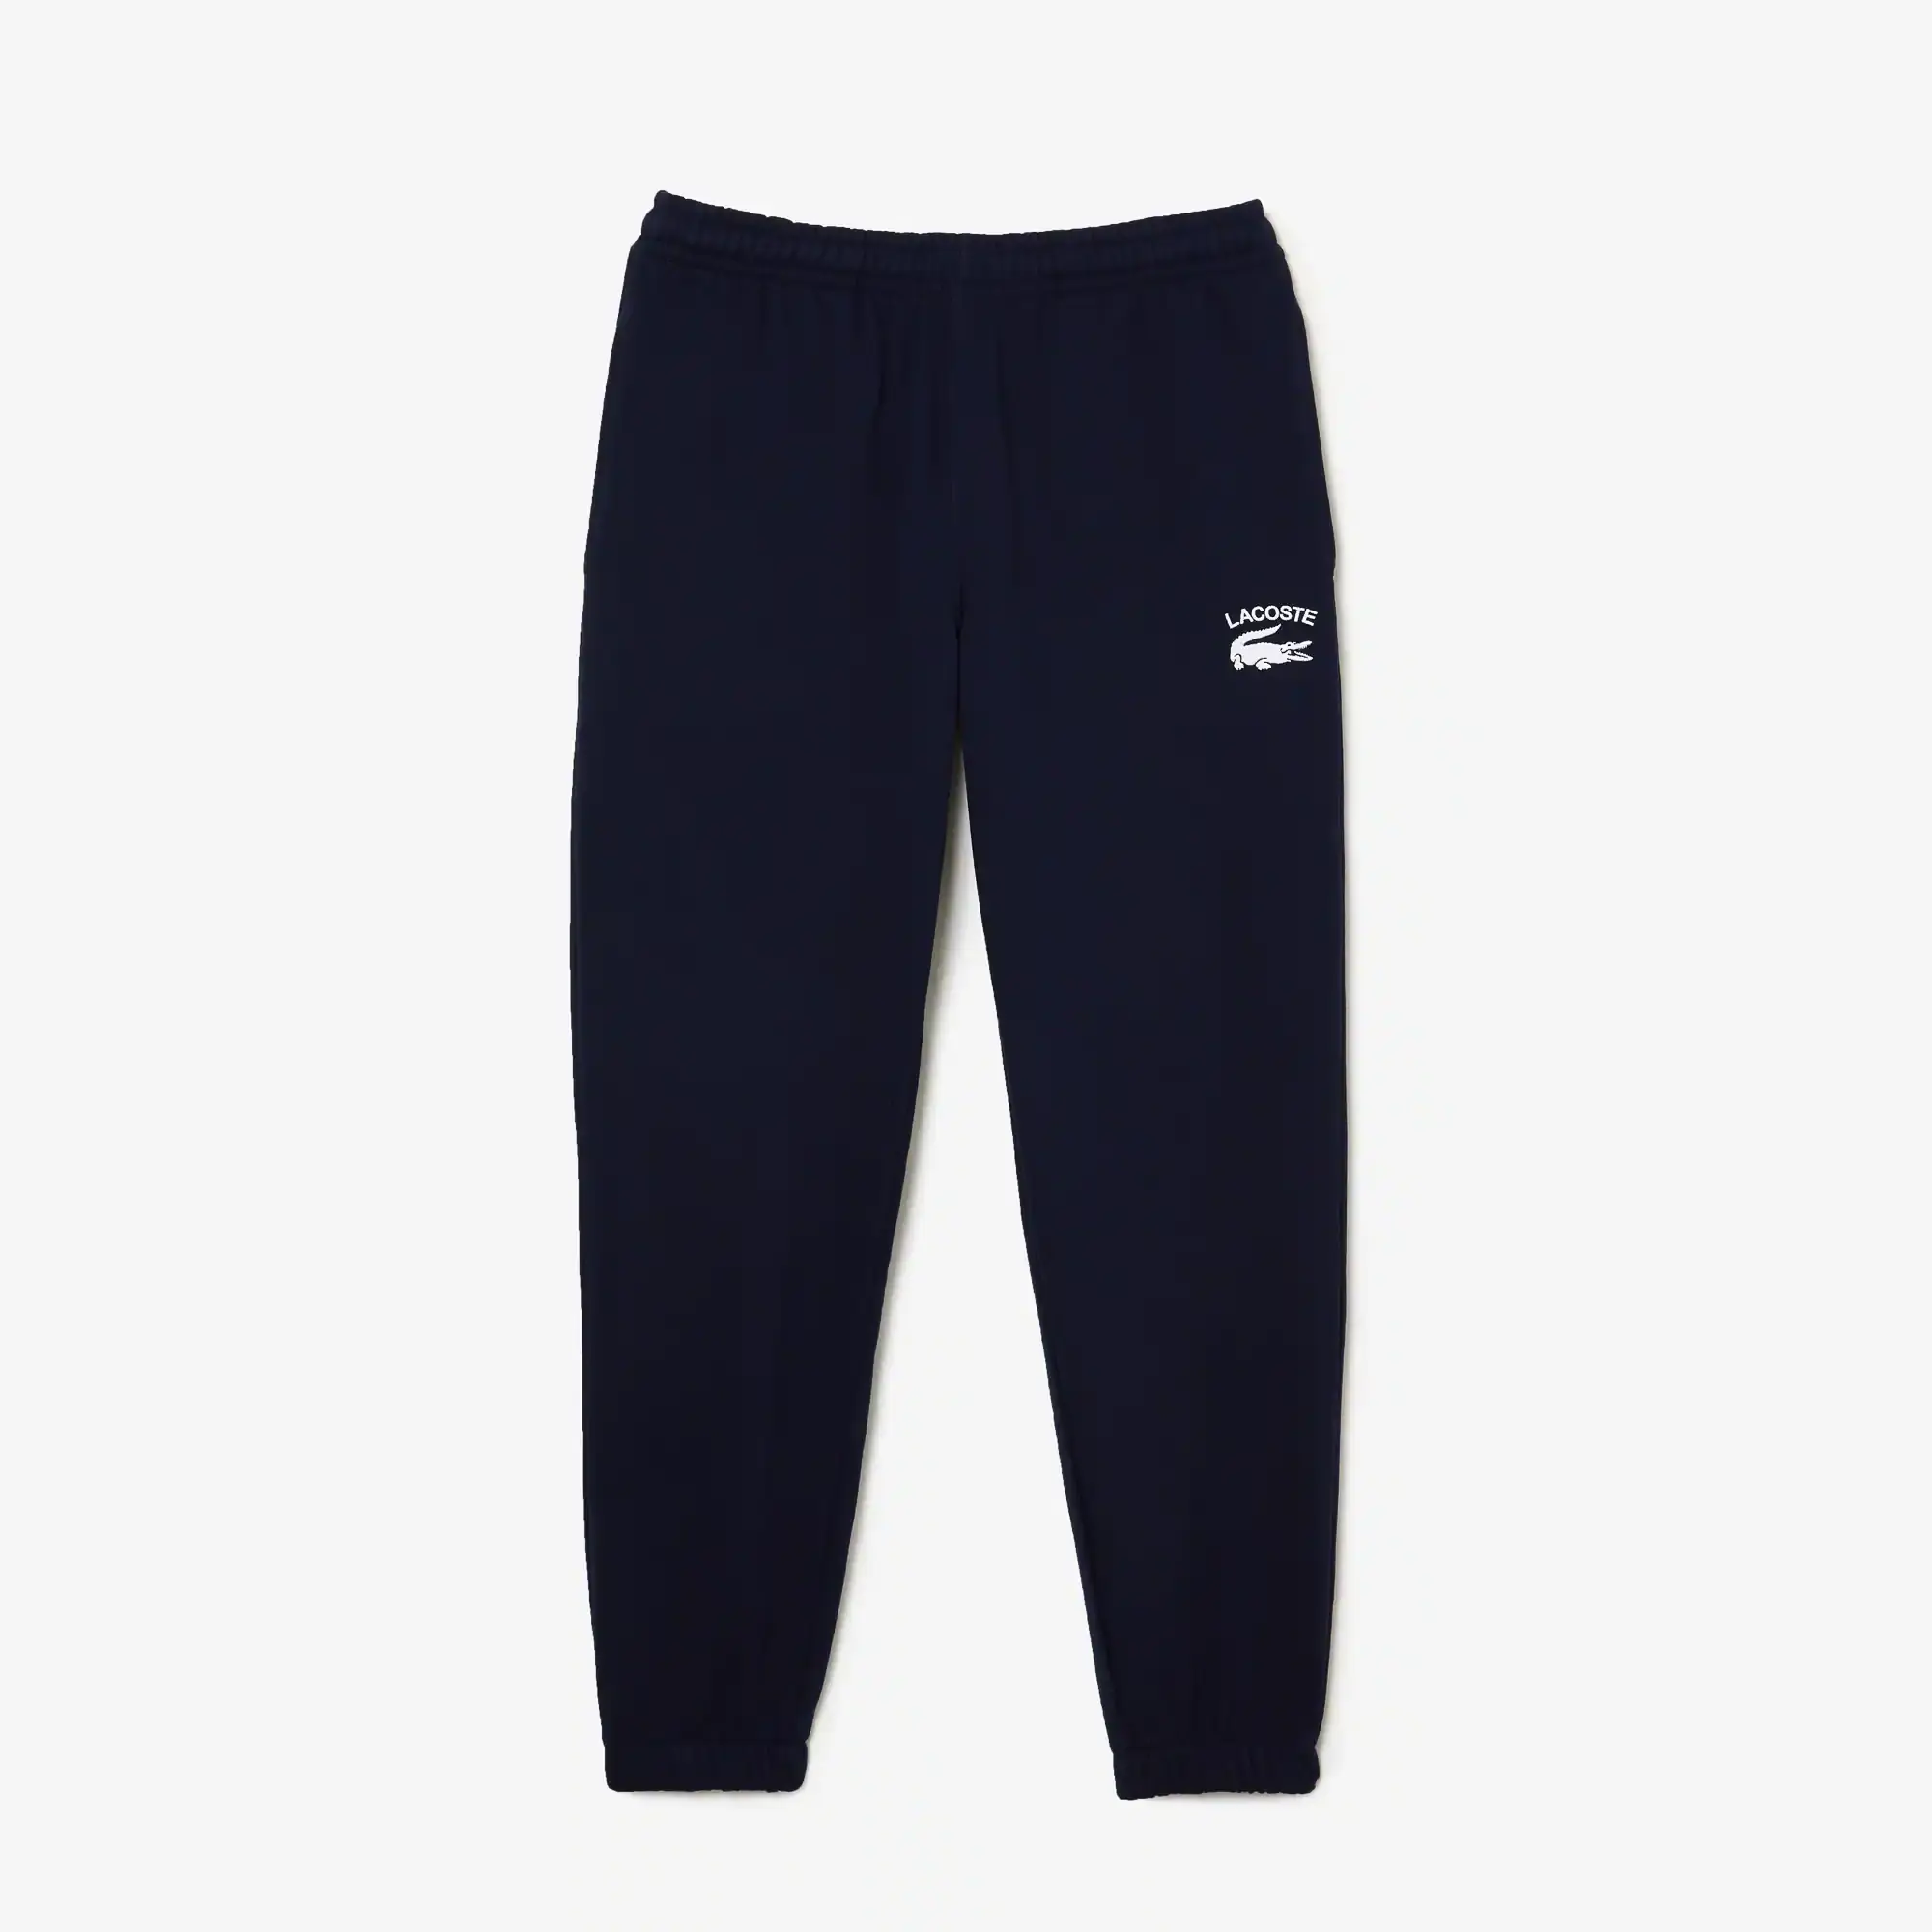 Lacoste Men's Tapered Fit Sweatpants. 1